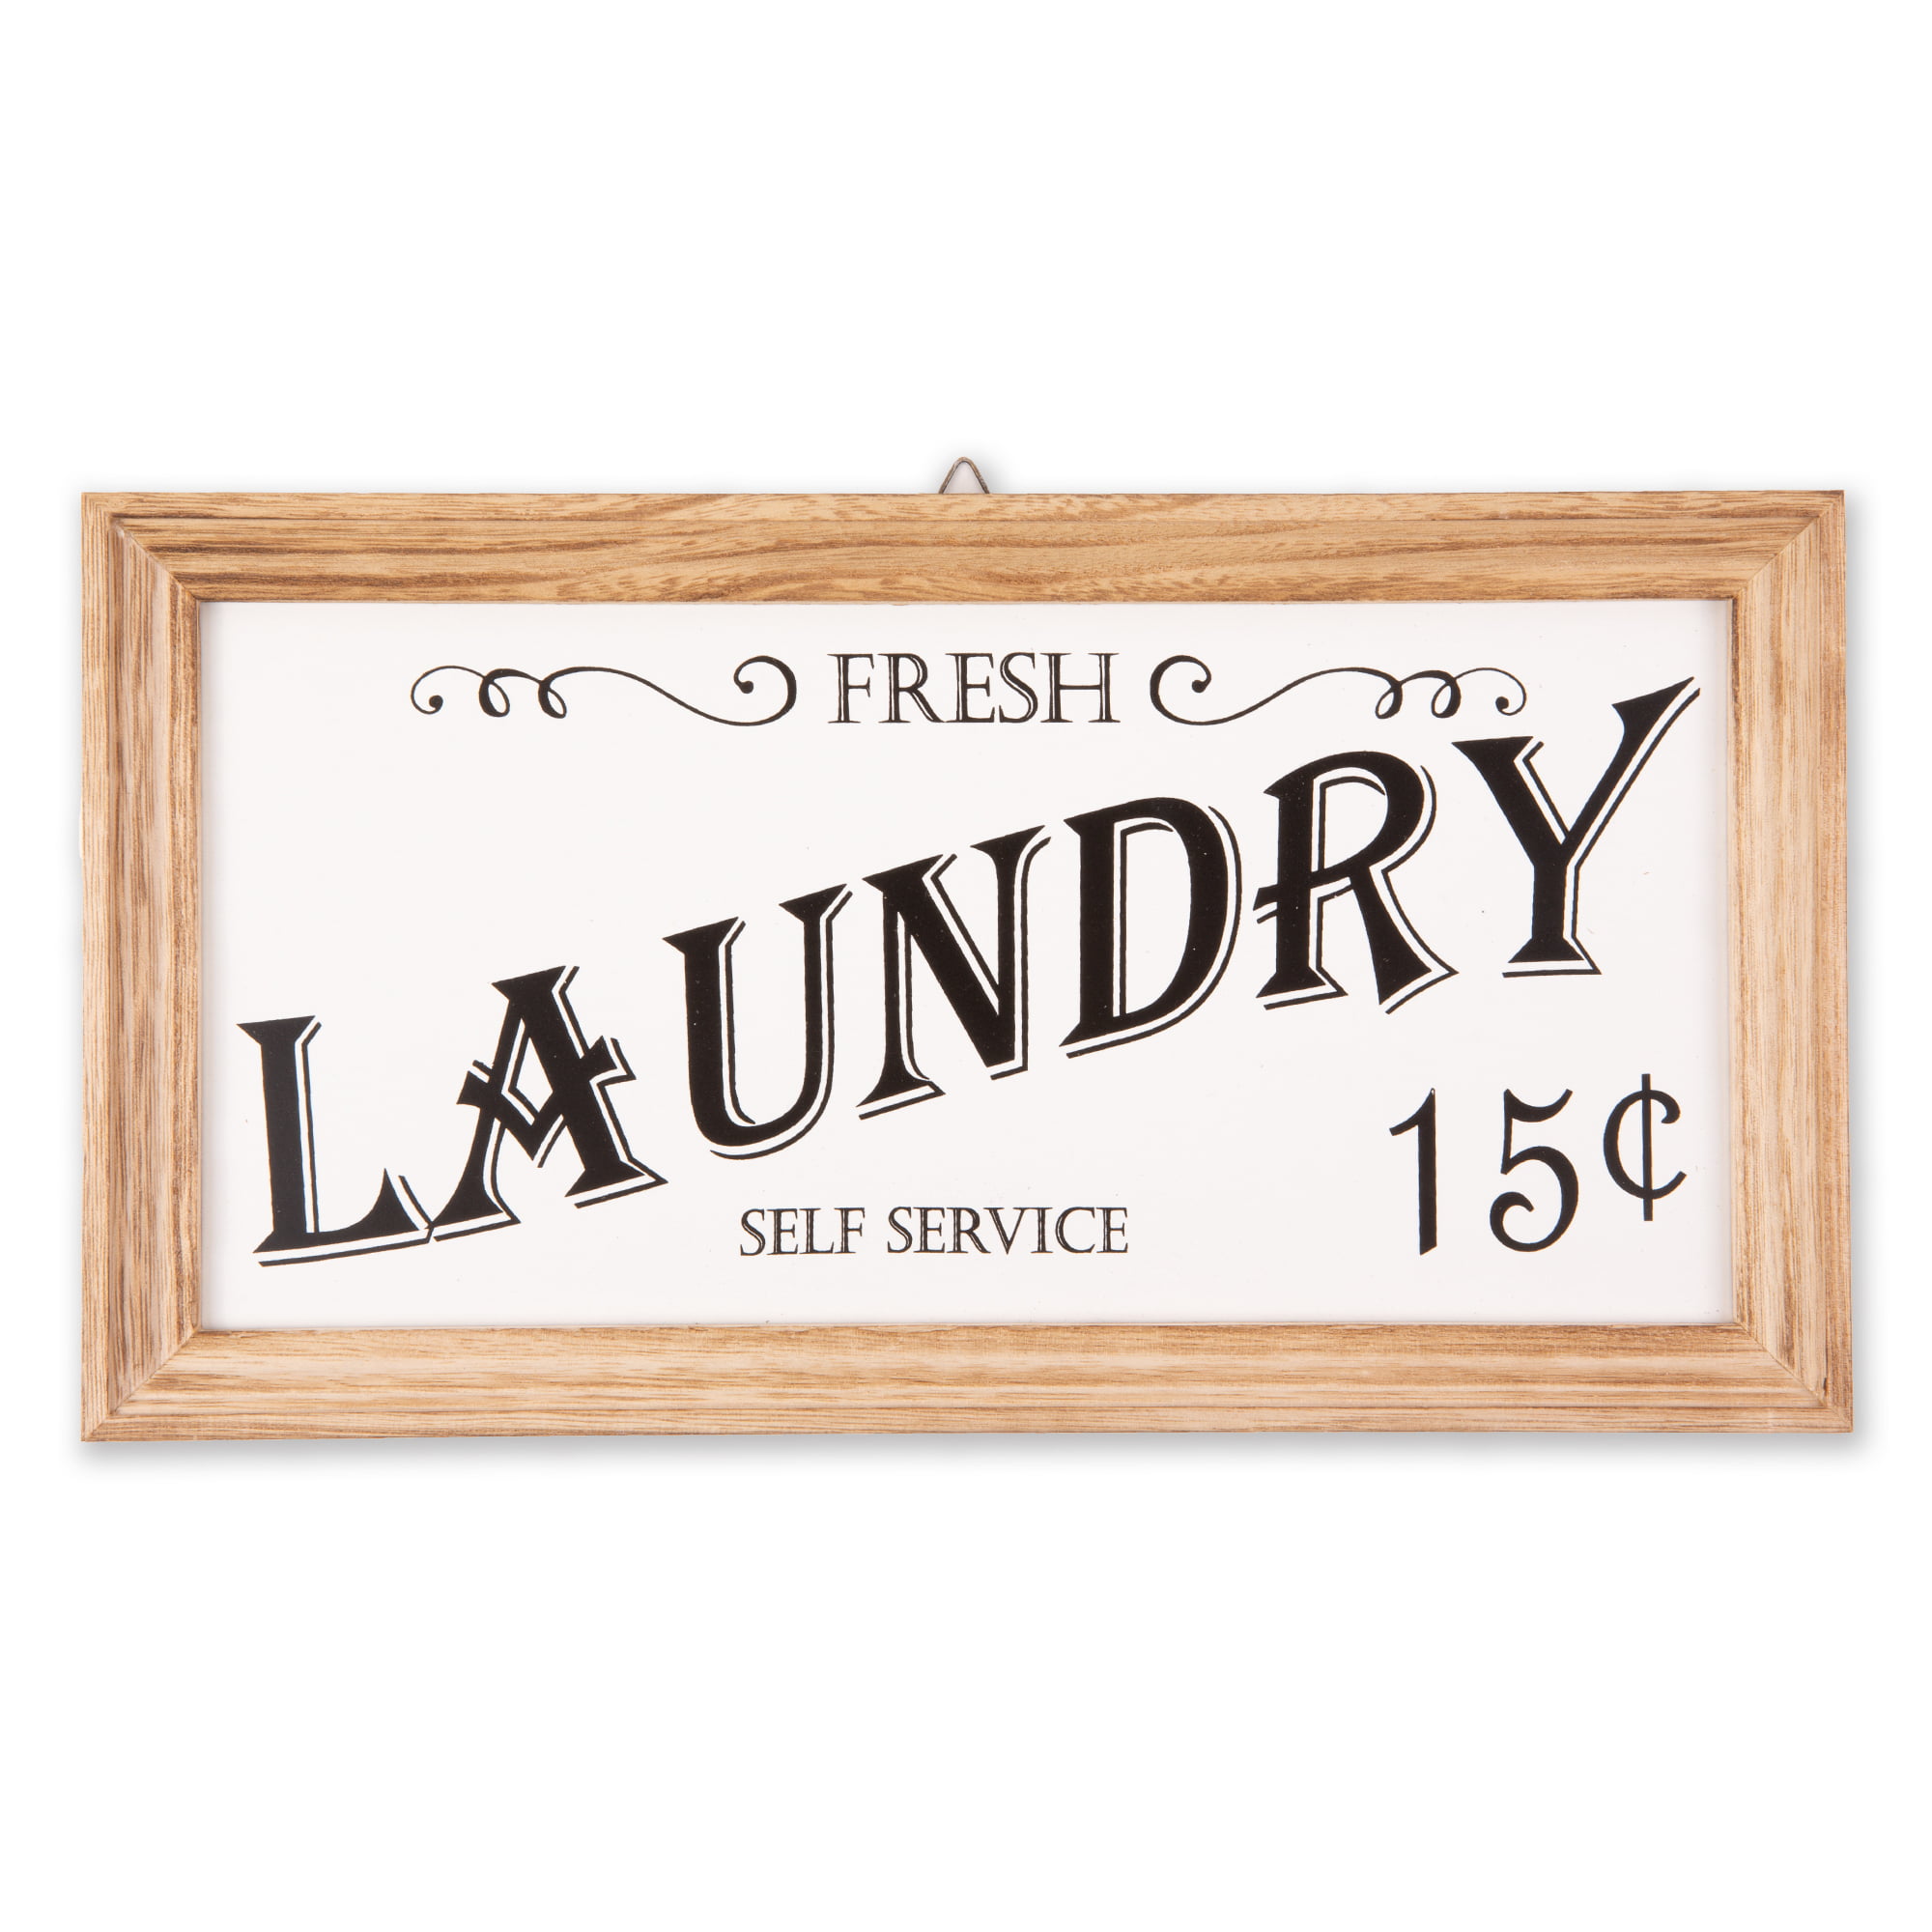 Laundry Wooden Sign plaque Country Beer,GARAGE,Shed Bathroom,Laundry Home decor 